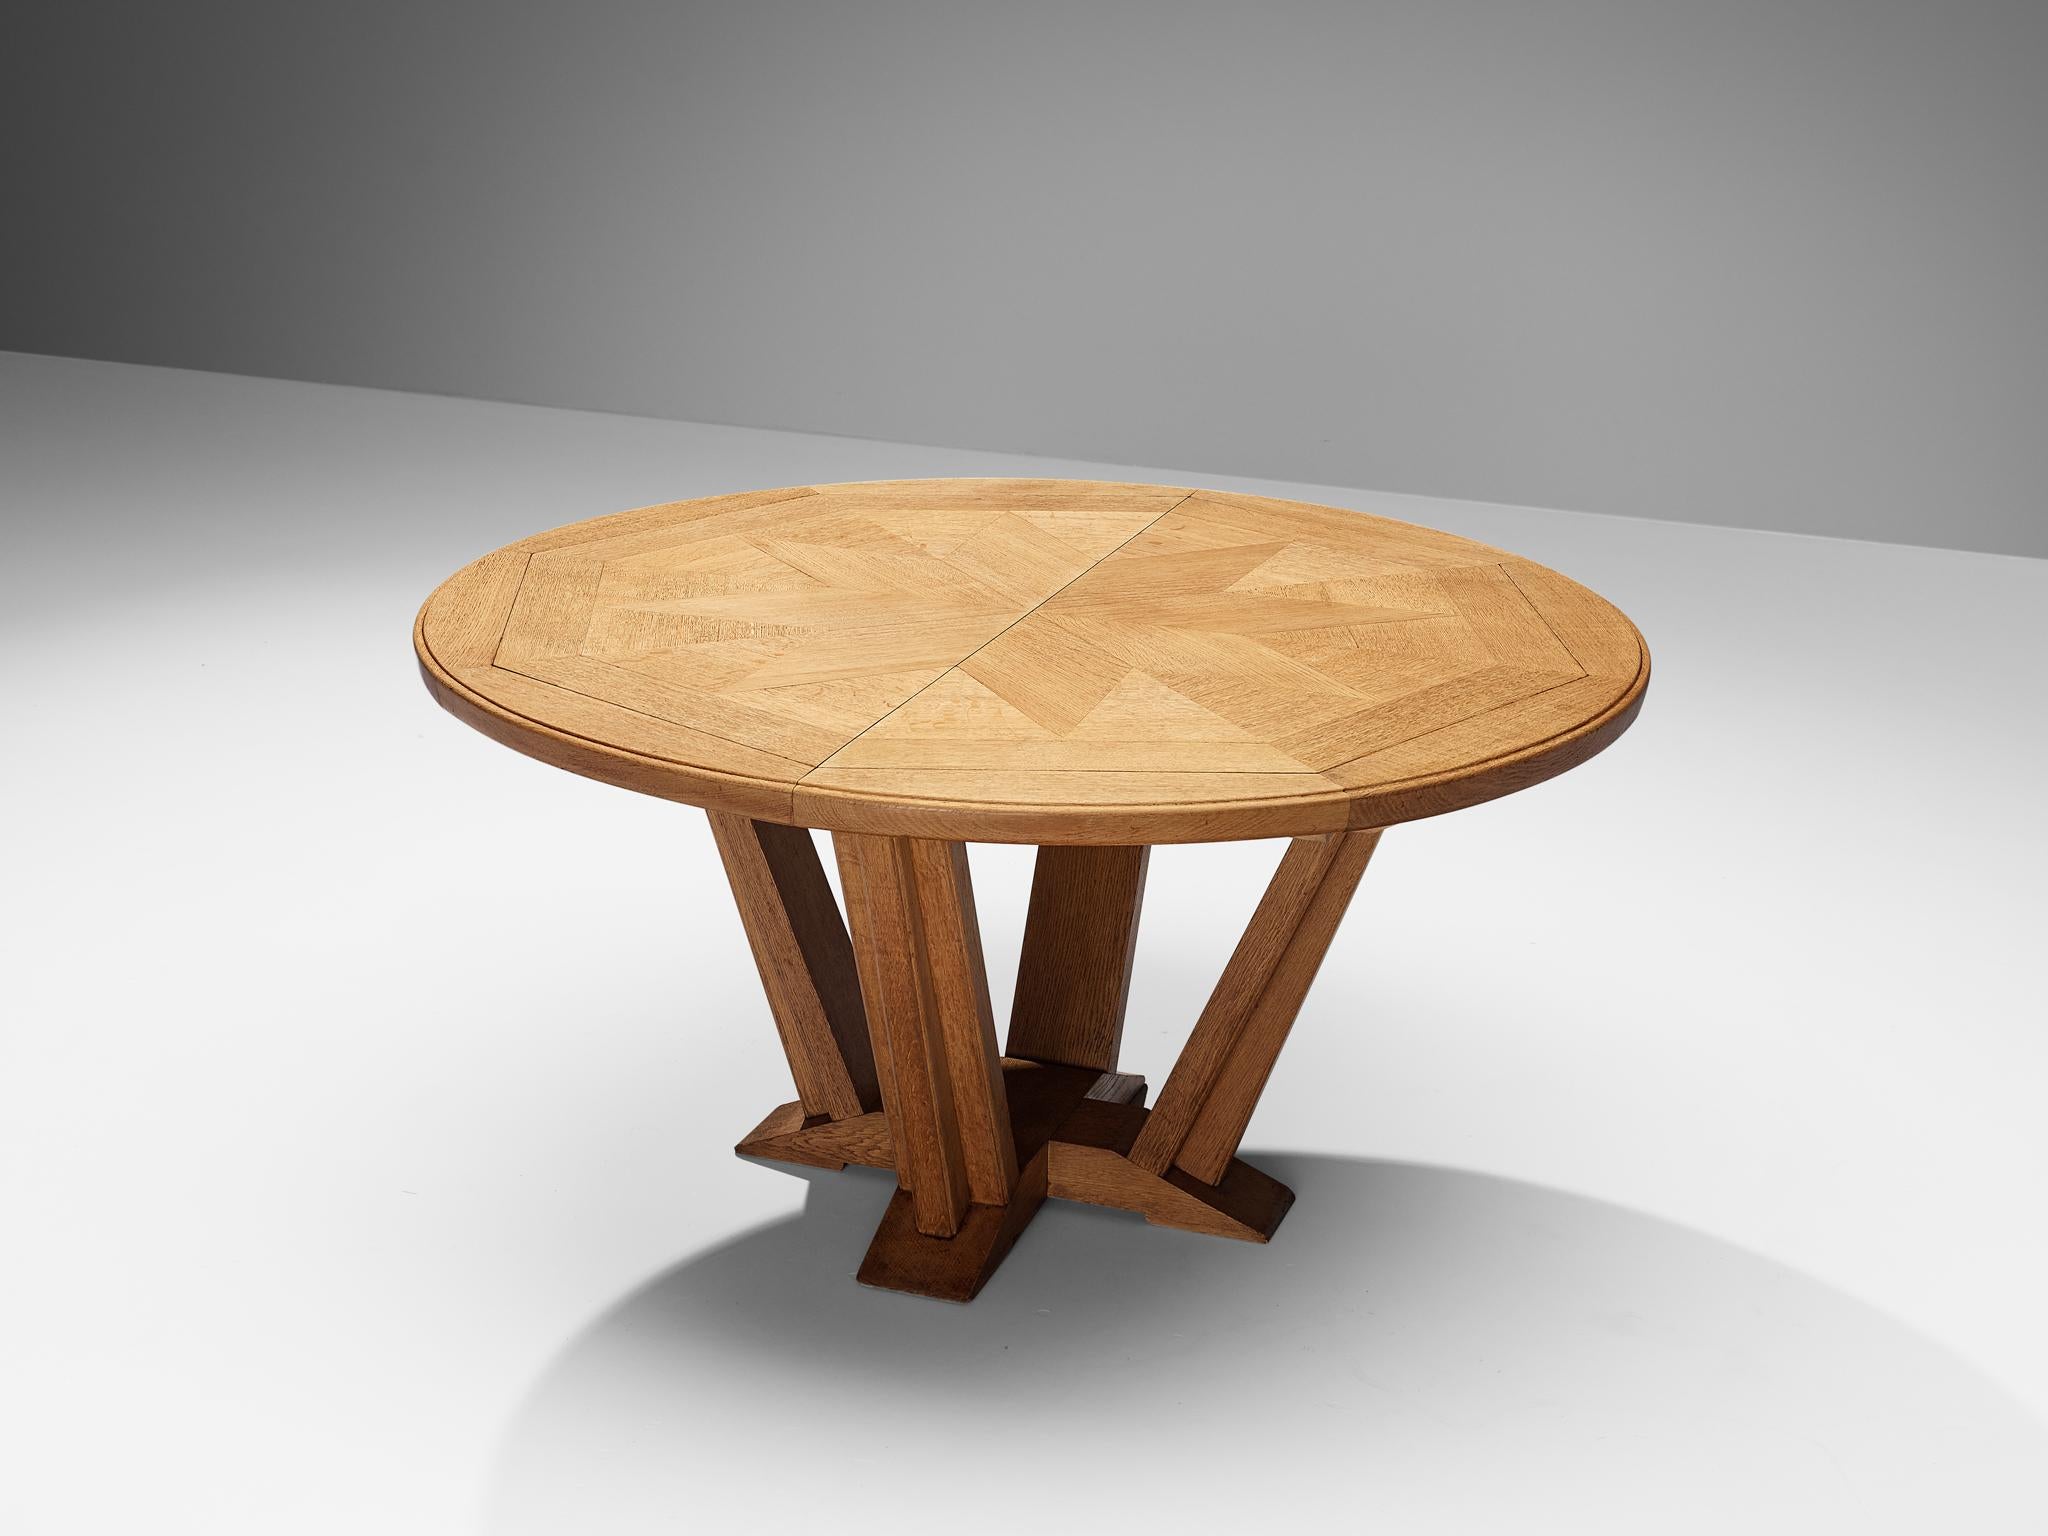 Guillerme et Chambron for Votre Maison, extendable dining table model 'Victorine' first edition, oak, France, 1948/50.

This wonderful table is the first edition 'Victorine' table as it is made around 1948/50. This particular design is different